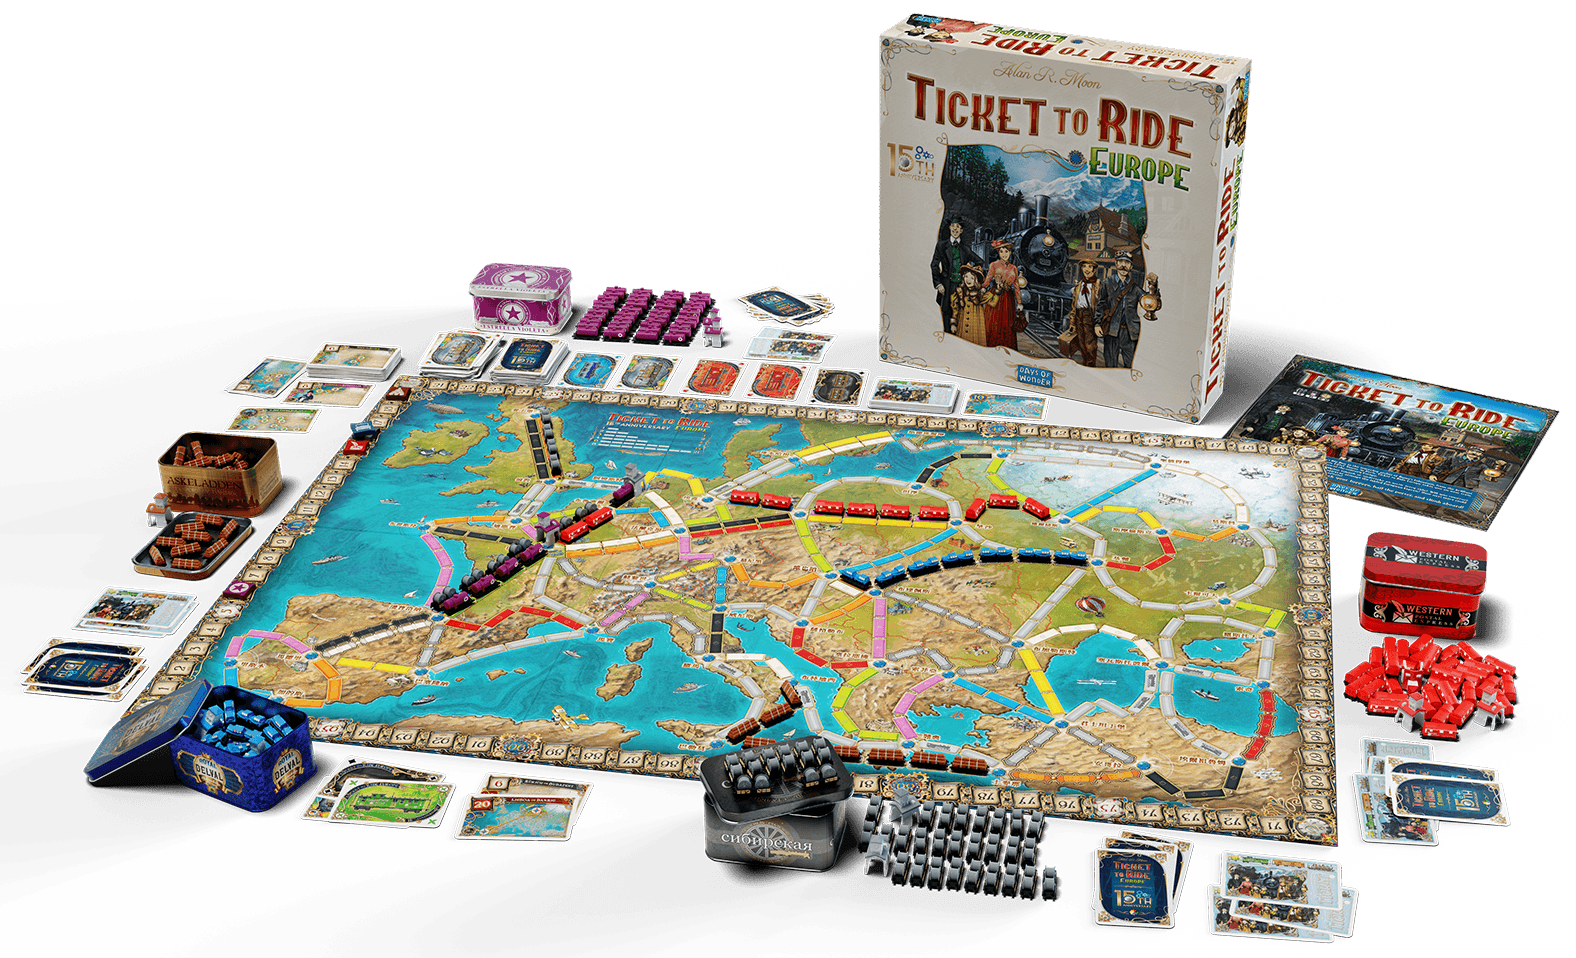 New Ticket To Ride Europe Anniversary Edition Announced! OnTableTop